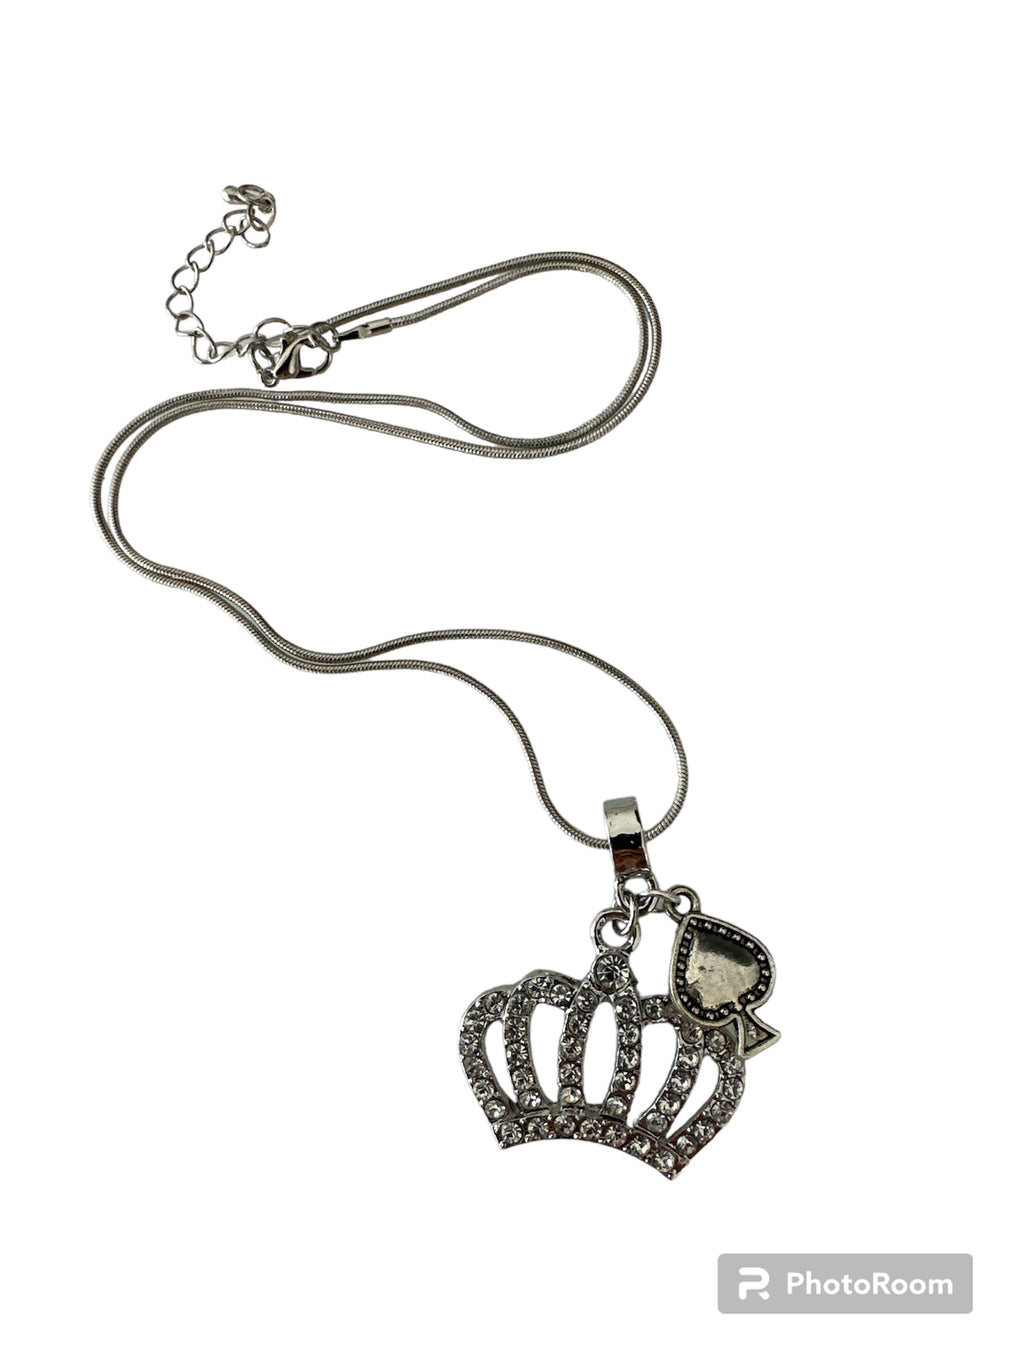 QOS Queen Of Spades - Silver Crown Charm Necklace V2 - Cuckold Jewelry